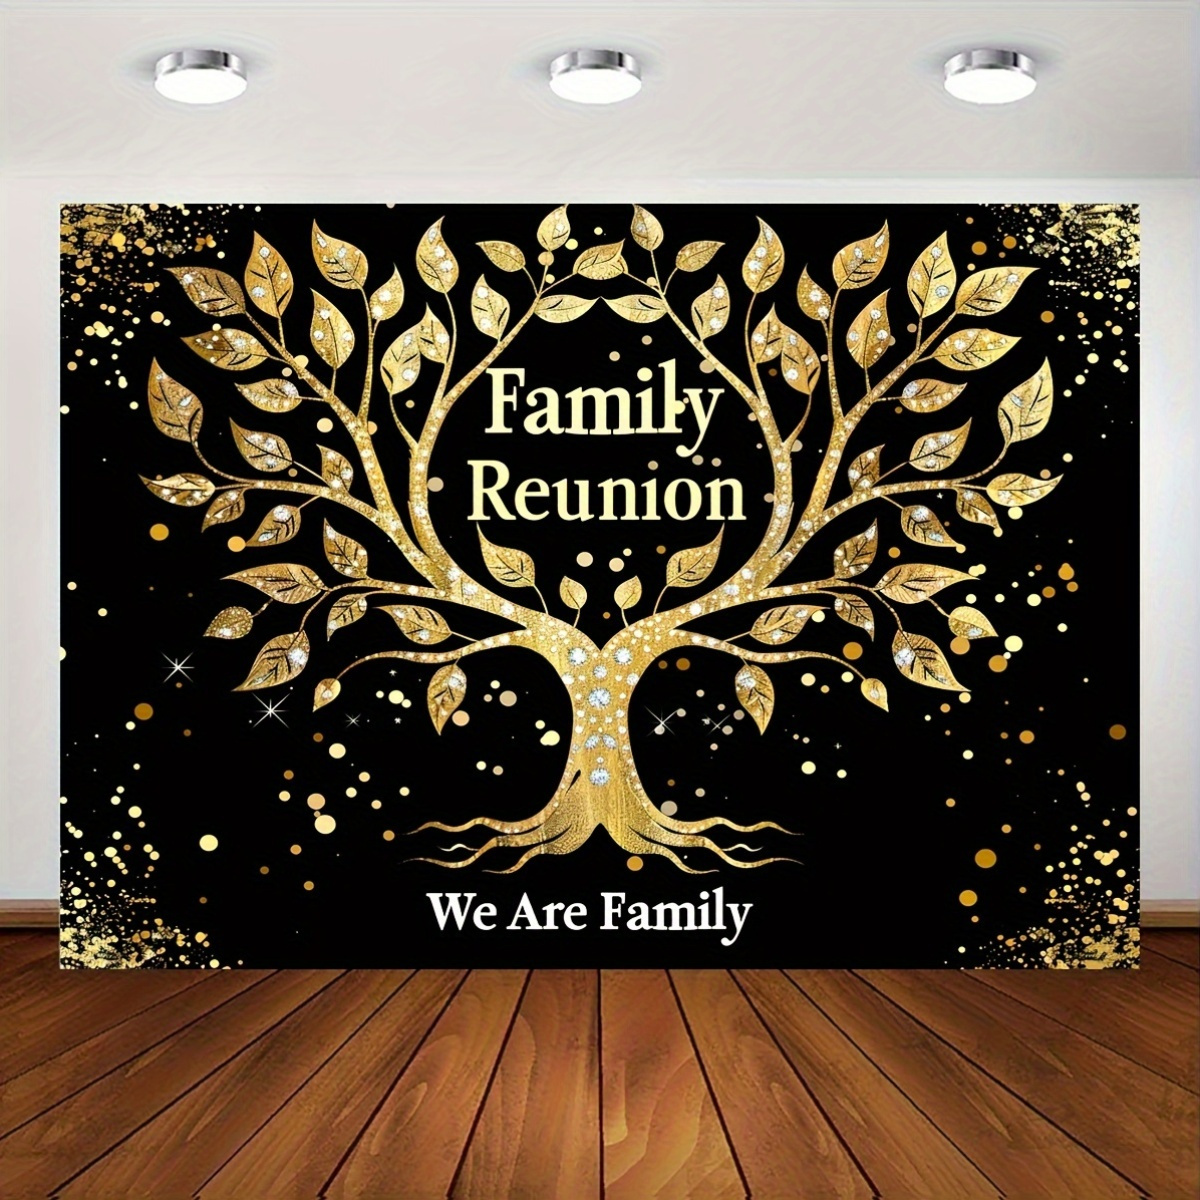 Family Reunion Backdrop Banner – Polyester Black and Gold Family Tree Party Decoration, Multipurpose Photo Background for Gatherings, Fall and Winter Holiday Events, No Electricity Needed – 1pc